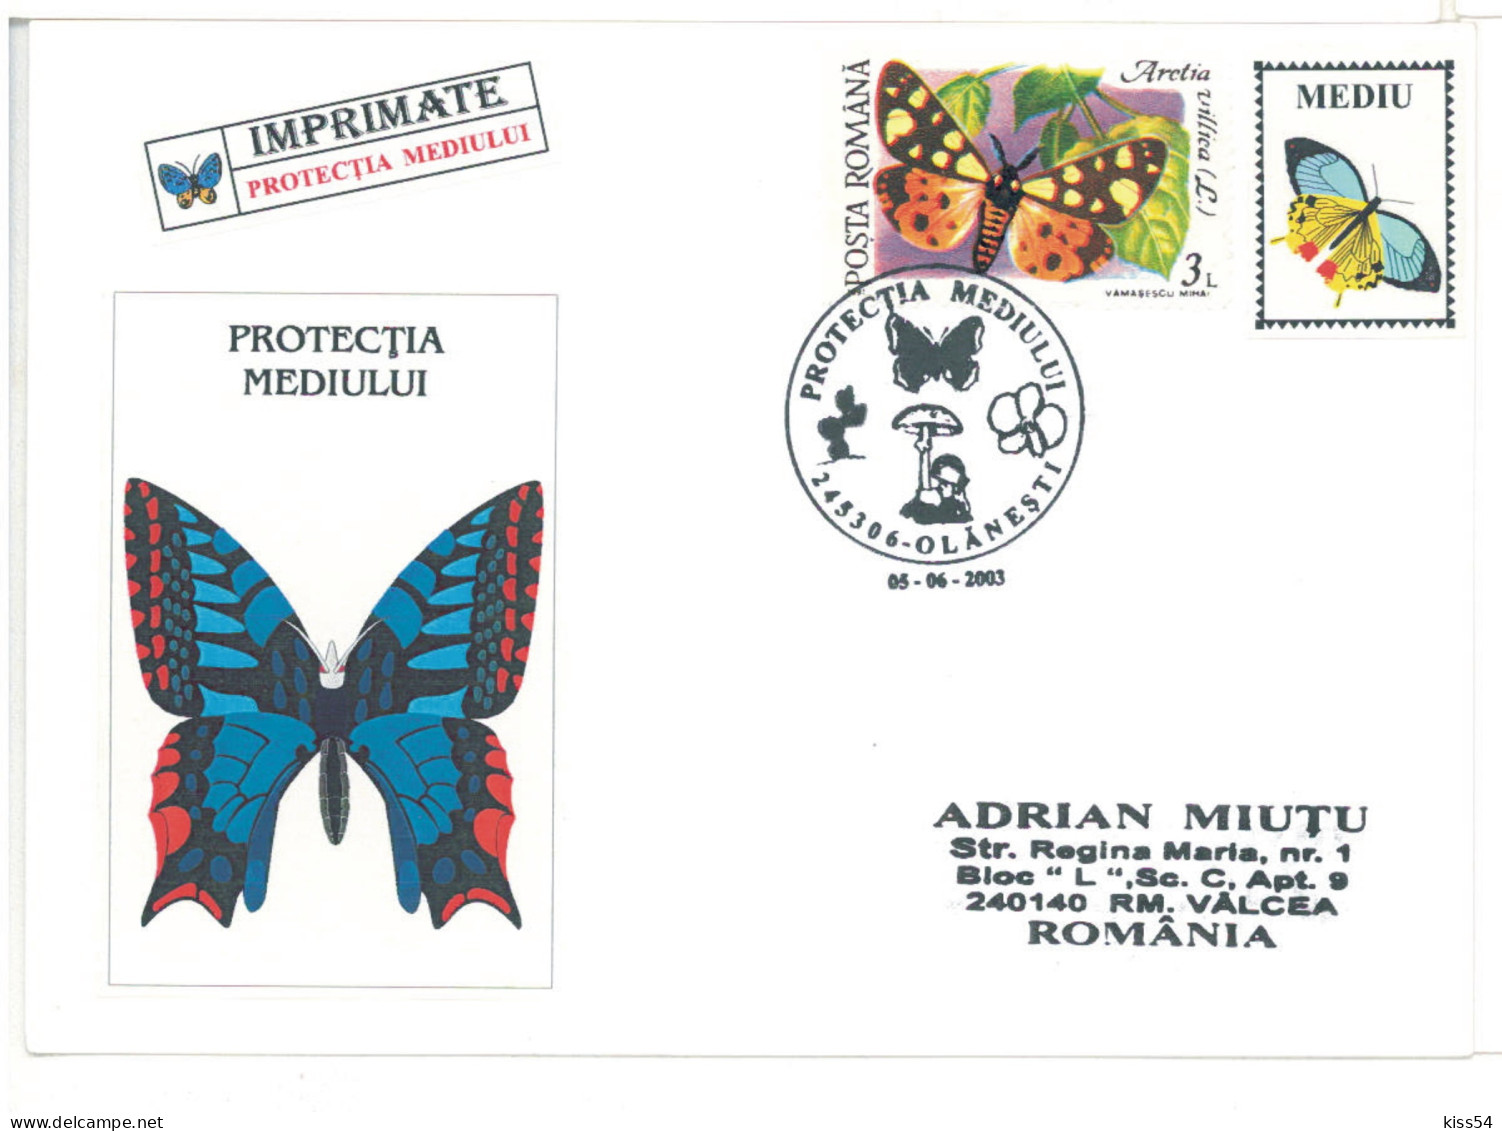 COV 97 - 637 BUTTERFLY, Romania - Cover - Used - 2003 - Butterflies